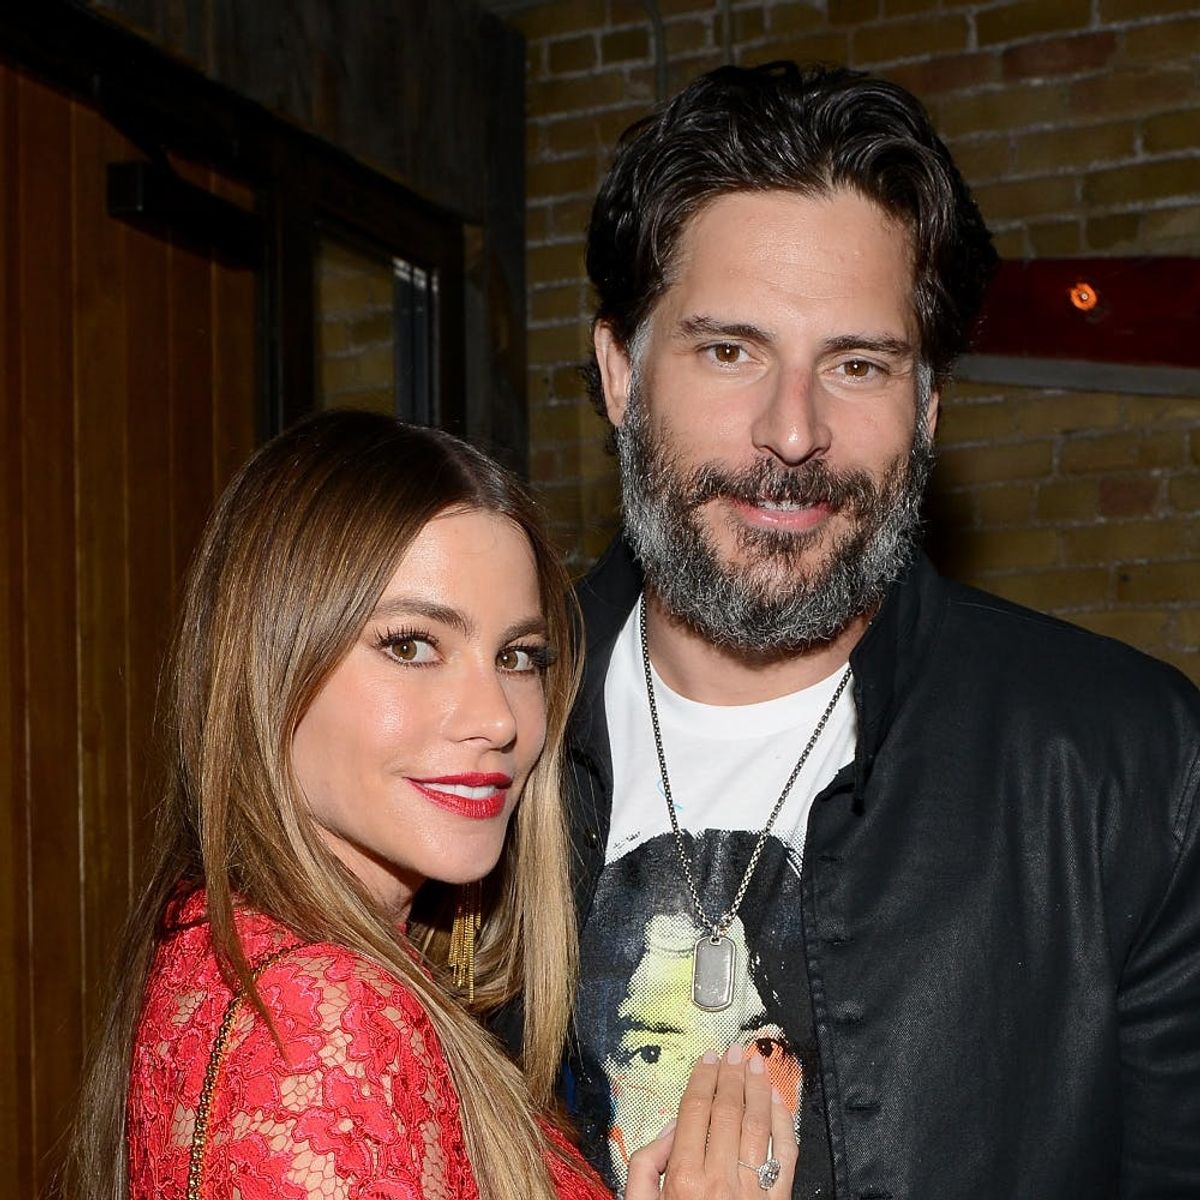 Baby News! Sofia Vergara and Joe Manganiello Are Expecting Their First Child Together